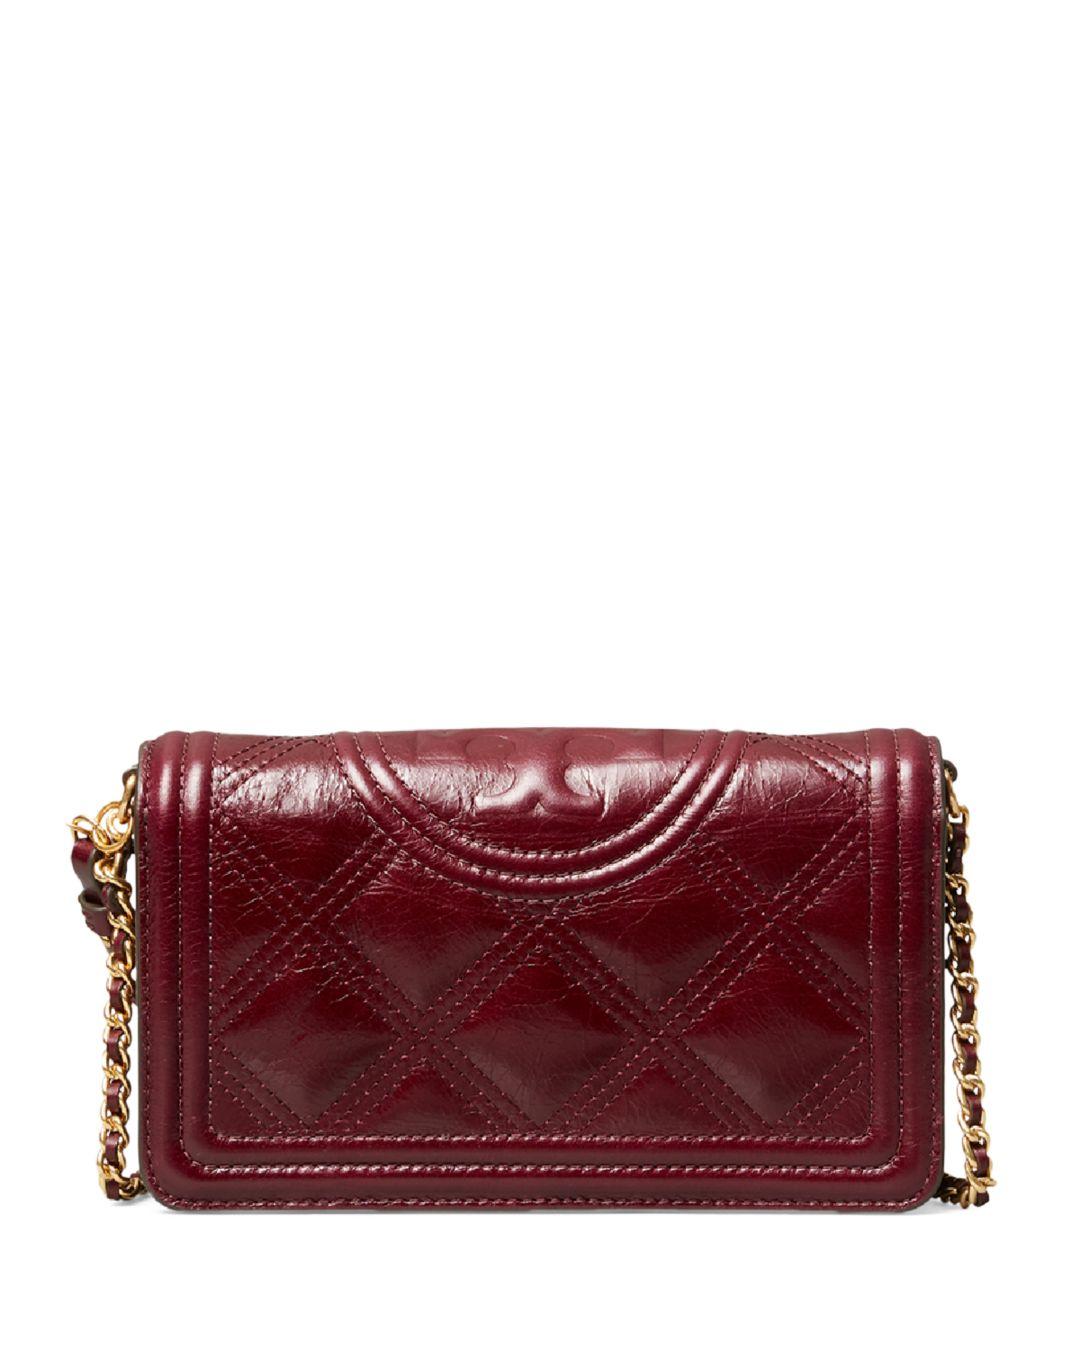 Tory Burch Leather Fleming Soft Glazed Wallet Crossbody in Red 